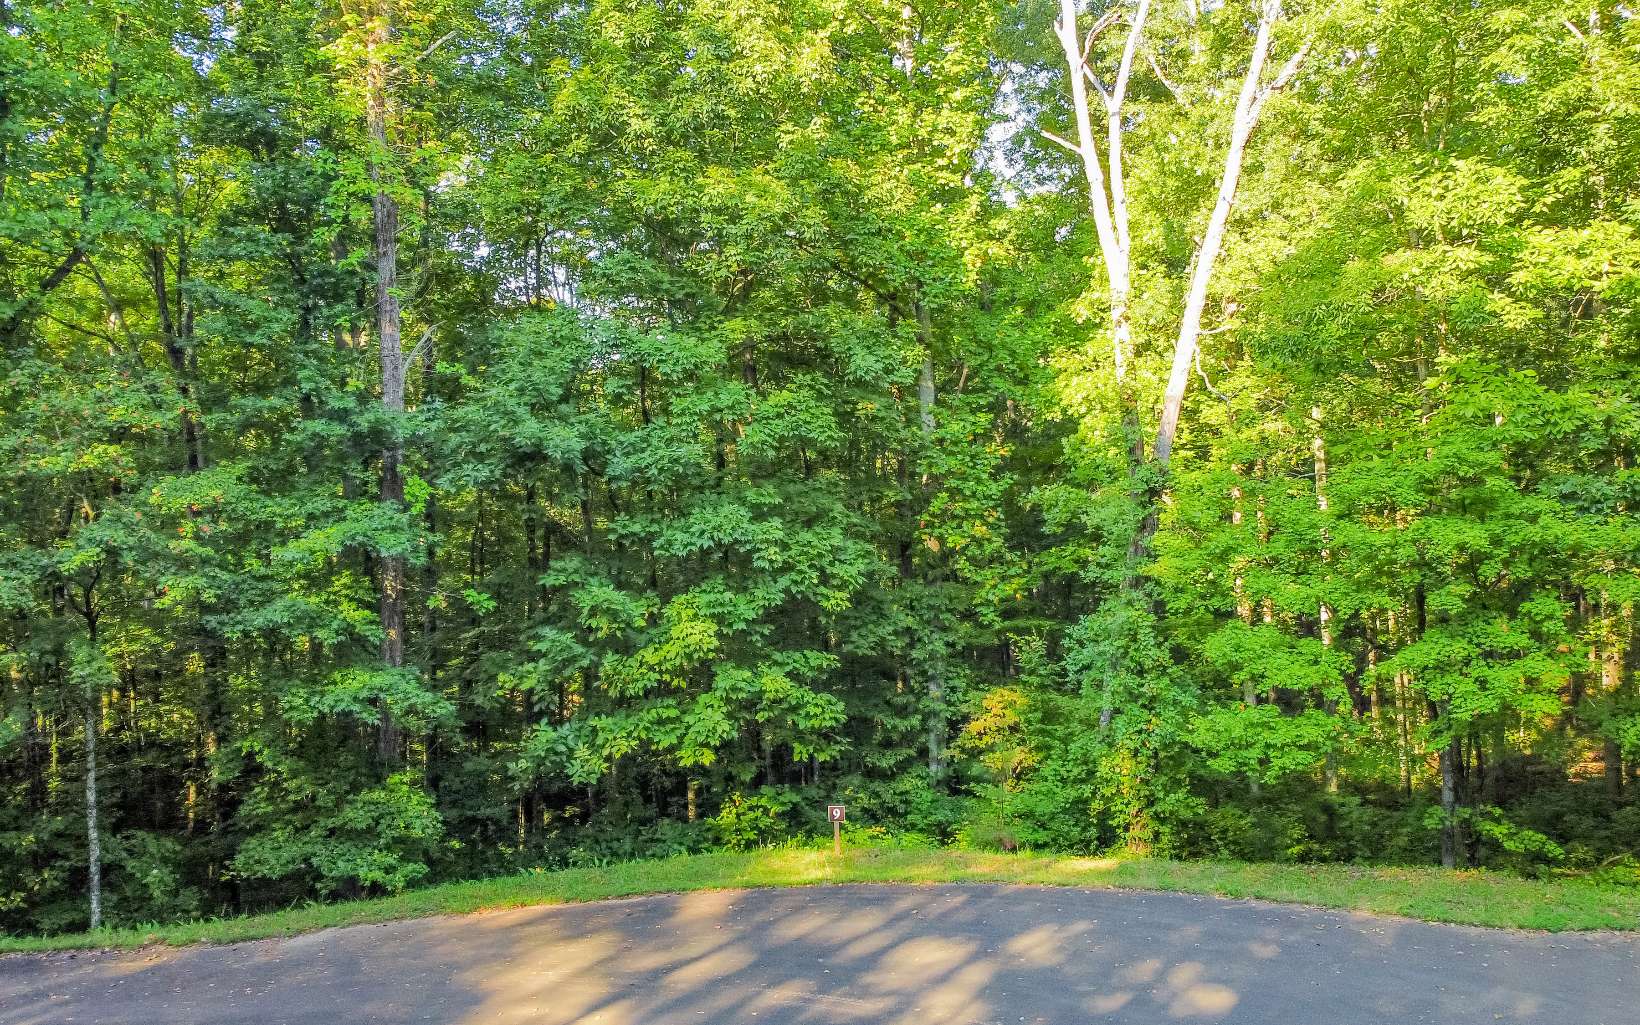 Looking for the perfect lot in a beautiful community that is in close relation to both Ellijay and Jasper to build a mountain home in? This 2.08 Acre Lot in Country Road Estates in Ellijay has all paved road access and entirely level or gentle laying terrain! This upscale community amenities include a community area with a pavilion and swings and fire pit area, gated entrance, all paved roads, electric available, great cell service, internet available and more! The best part is, you will be very close to both Ellijay and Jasper for all your dining and entertainment needs! Come view today before this one gets gone!